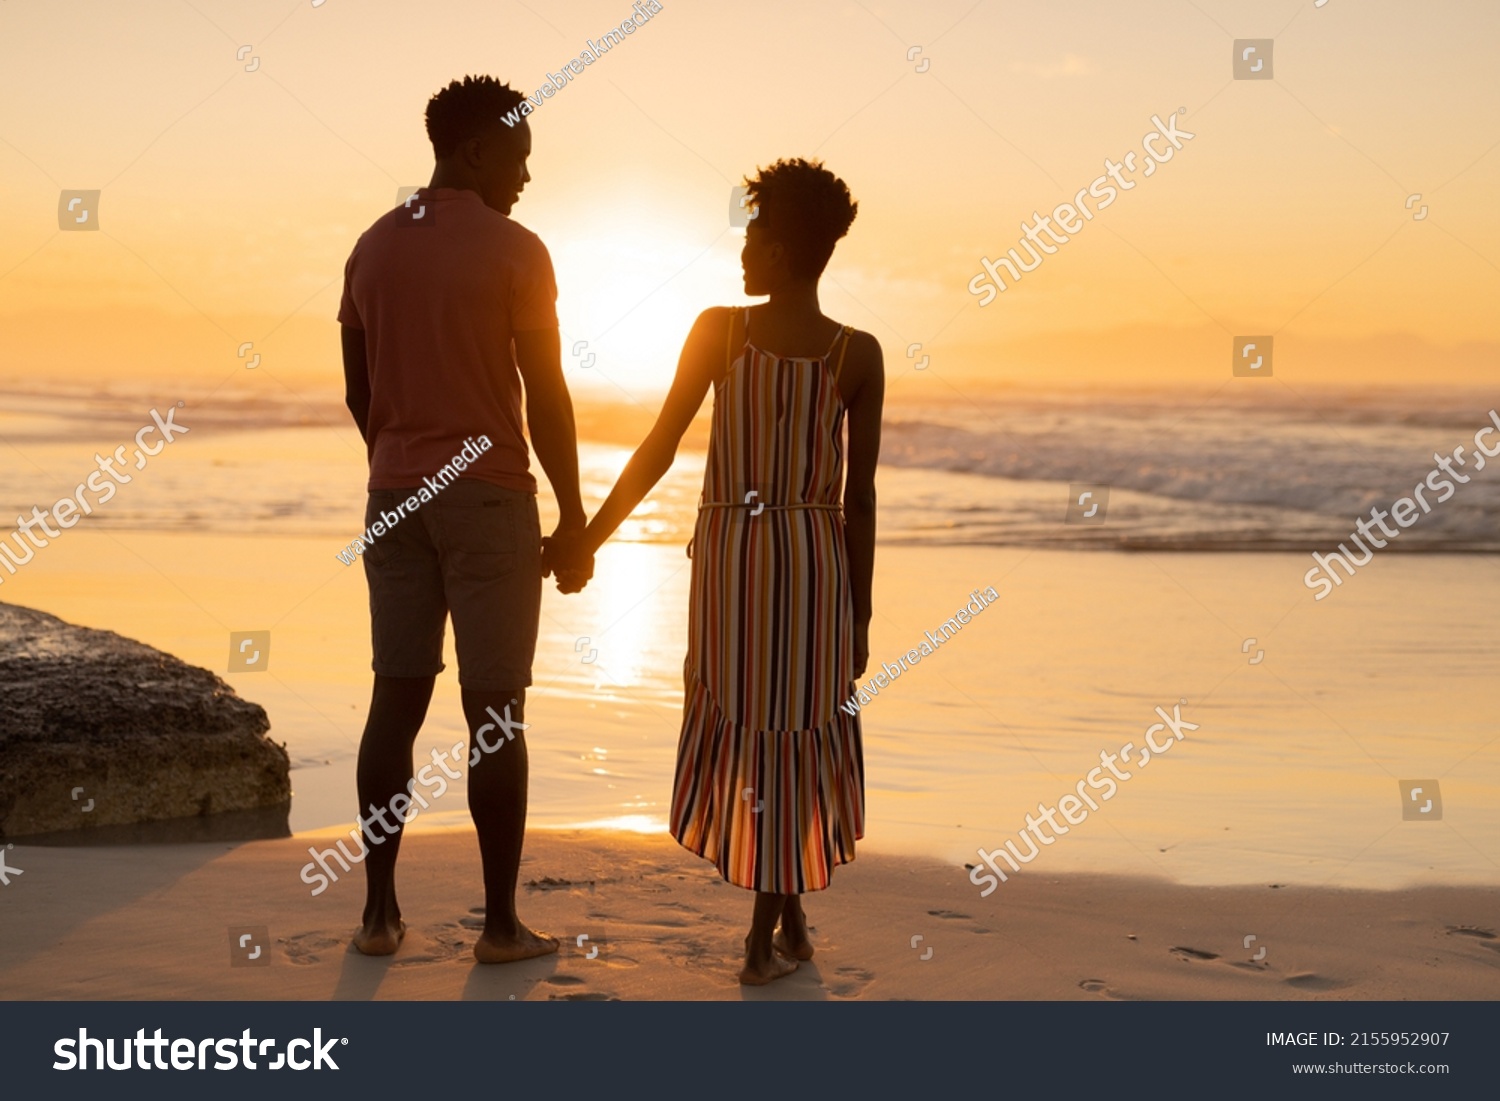 Rear view of african american young couple holding hands and standing on beach against sky at sunset. nature, unaltered, beach, love, togetherness, lifestyle, enjoyment and holiday concept. #2155952907